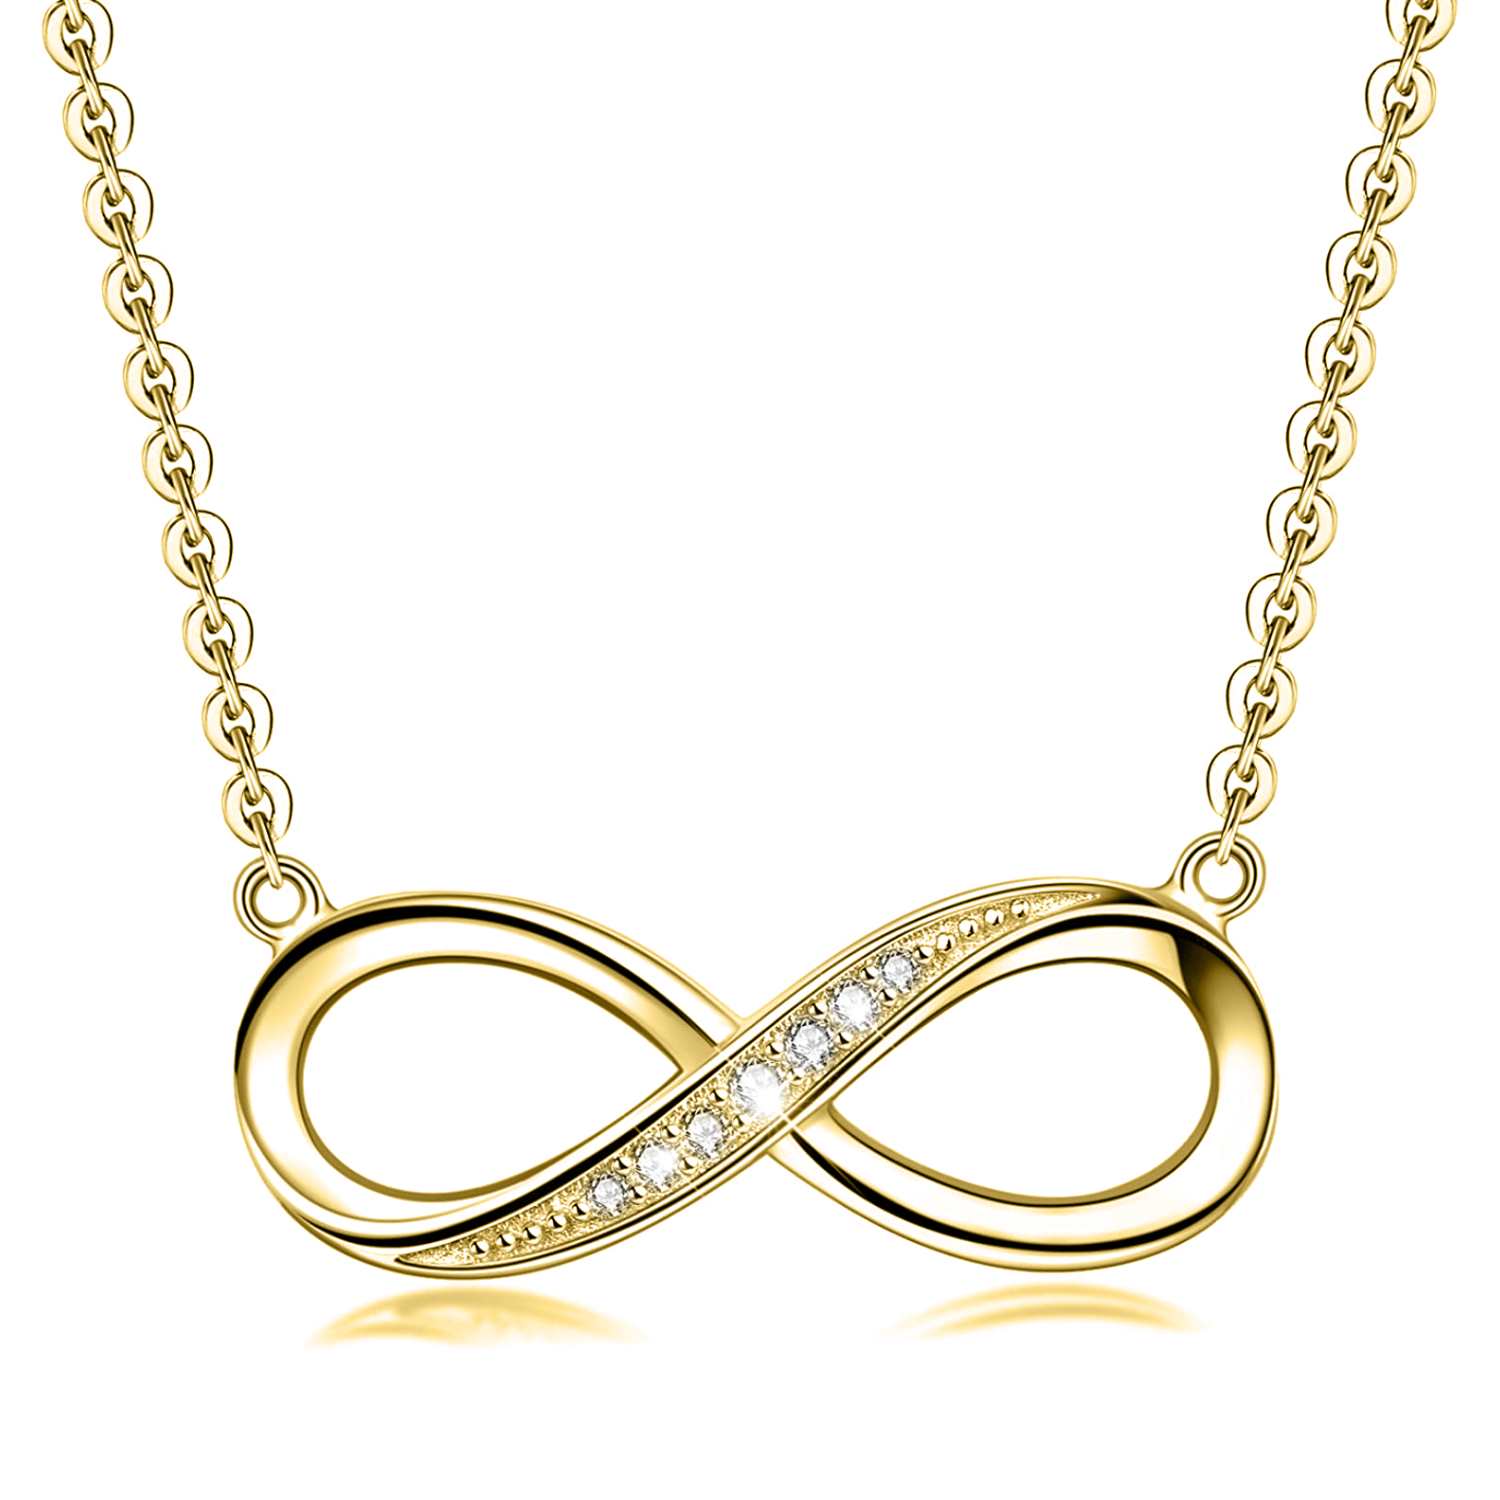 Infinity Pendant in 92.5 Silver - 18k Gold finish studded with Swiss Zirconia